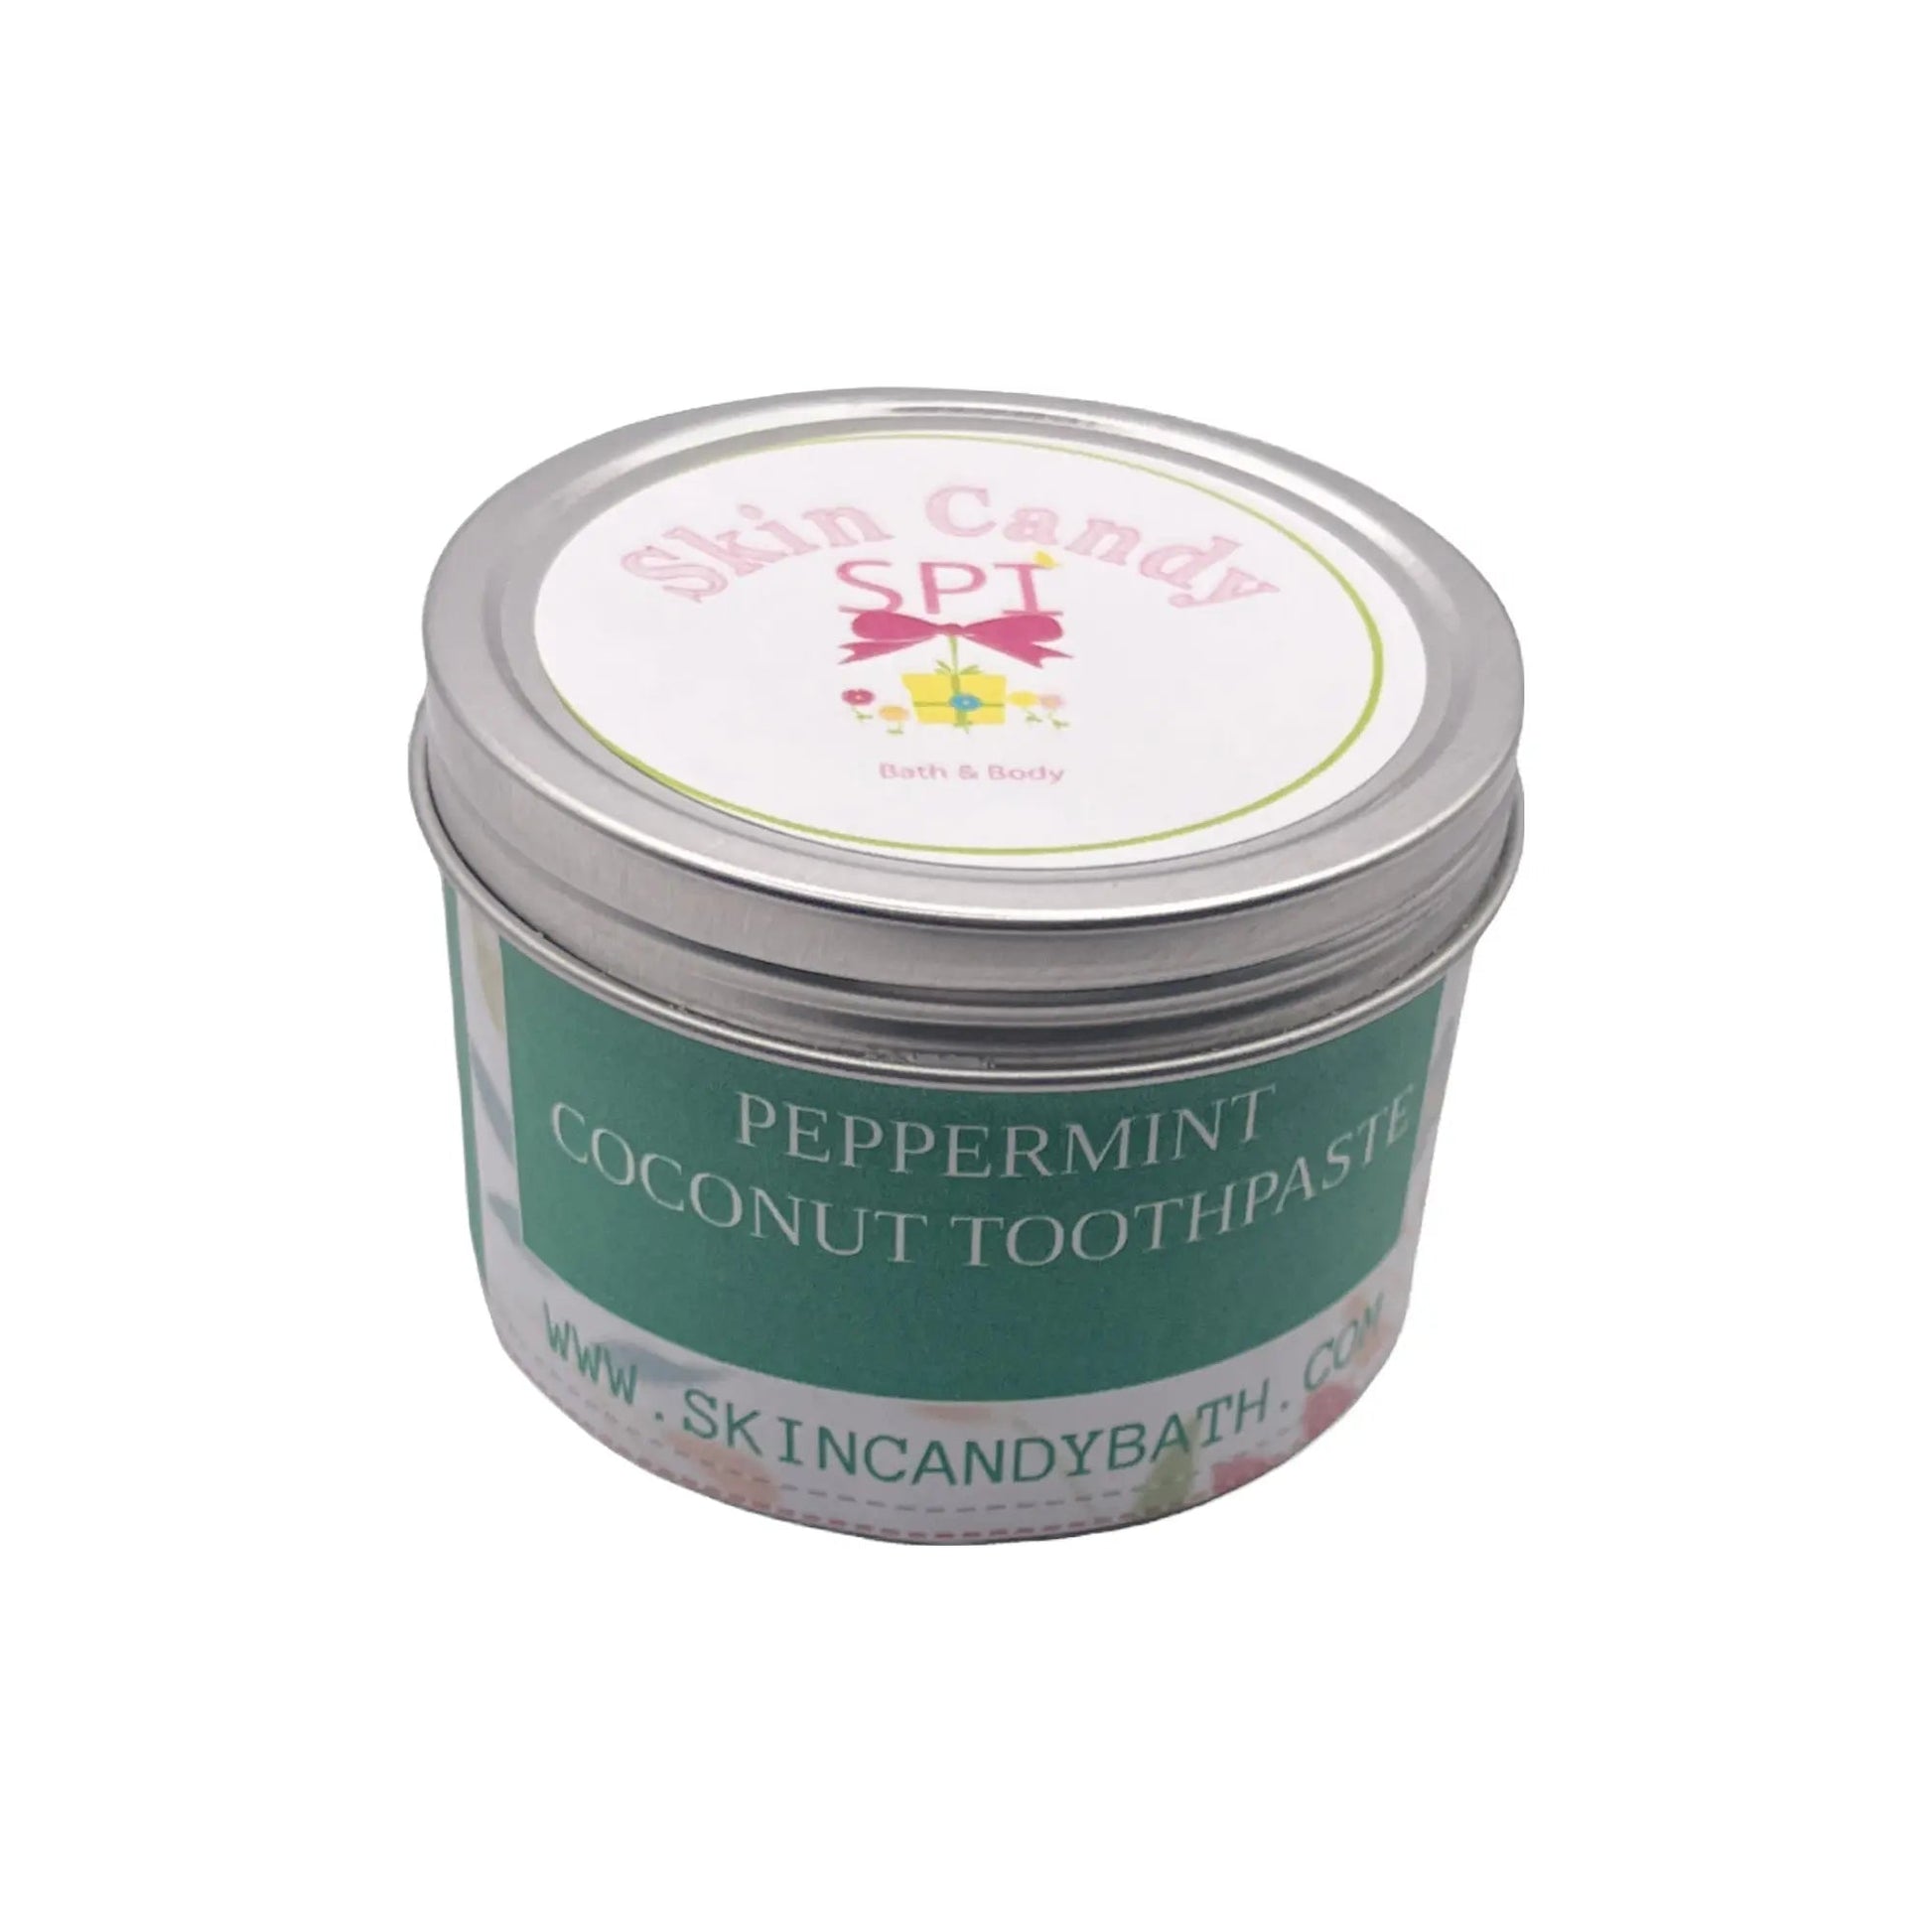 Peppermint Toothpaste - Skin Candy Bath & Body